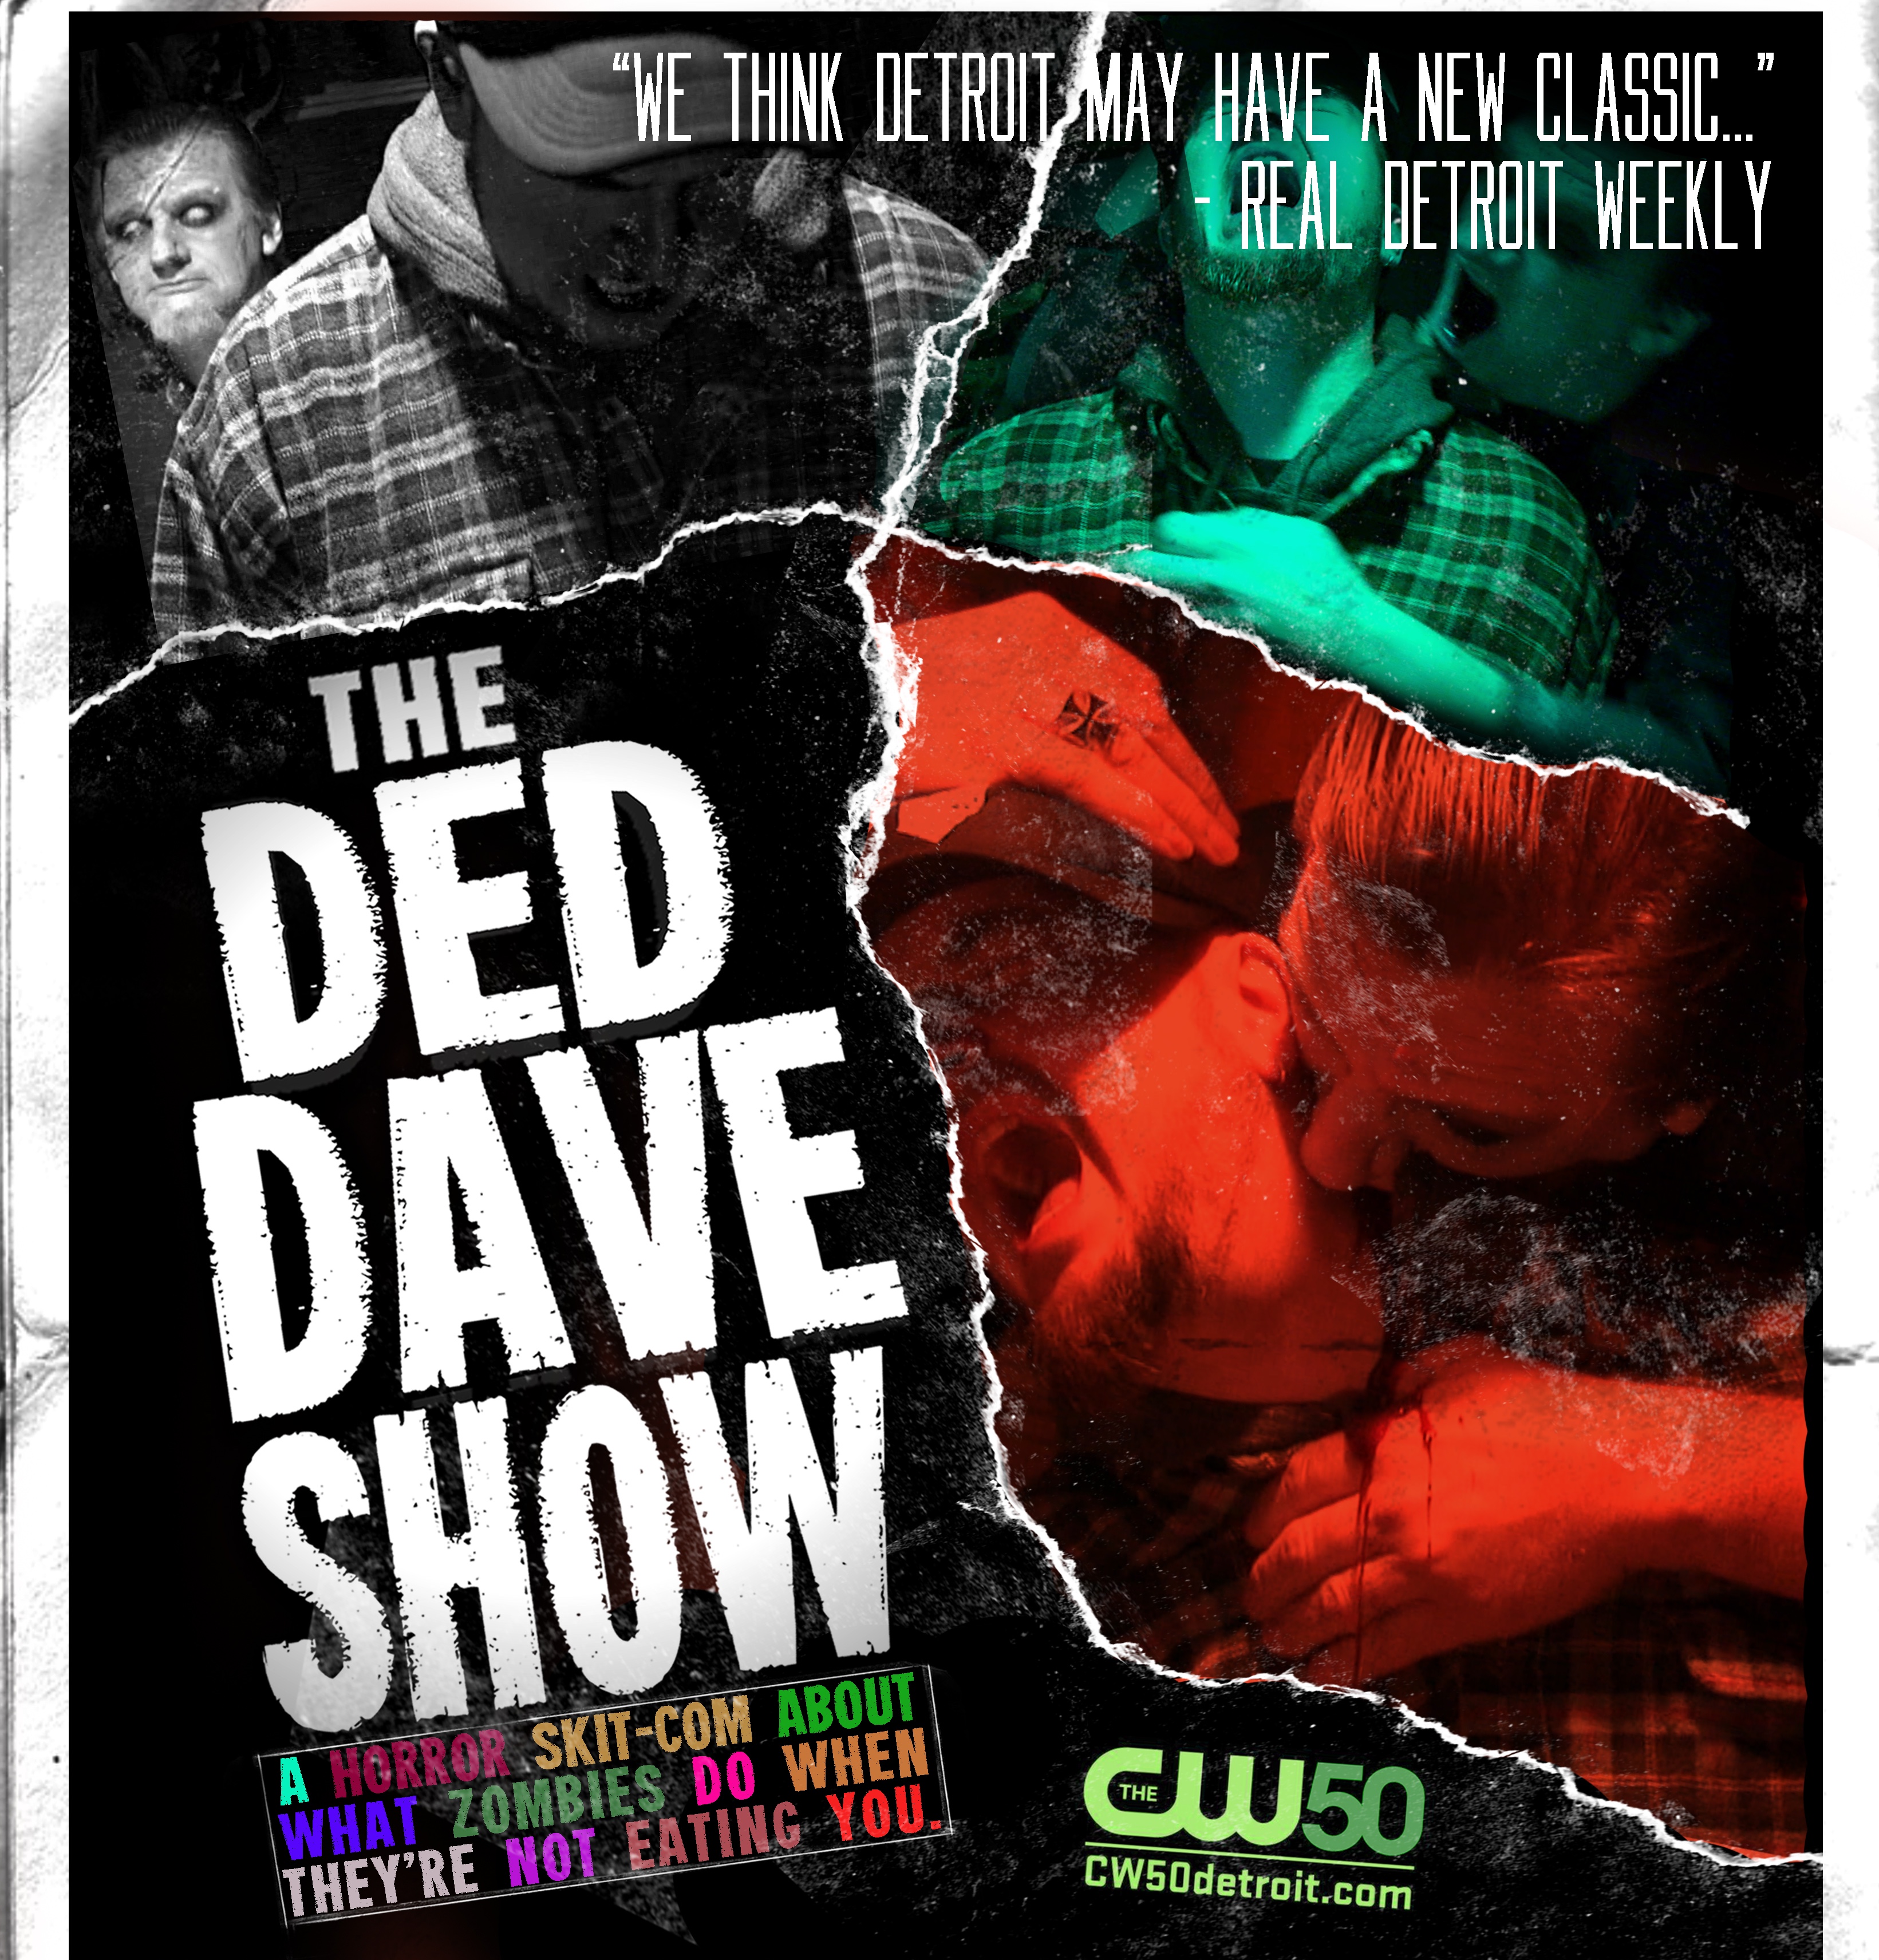 The Ded Dave Show